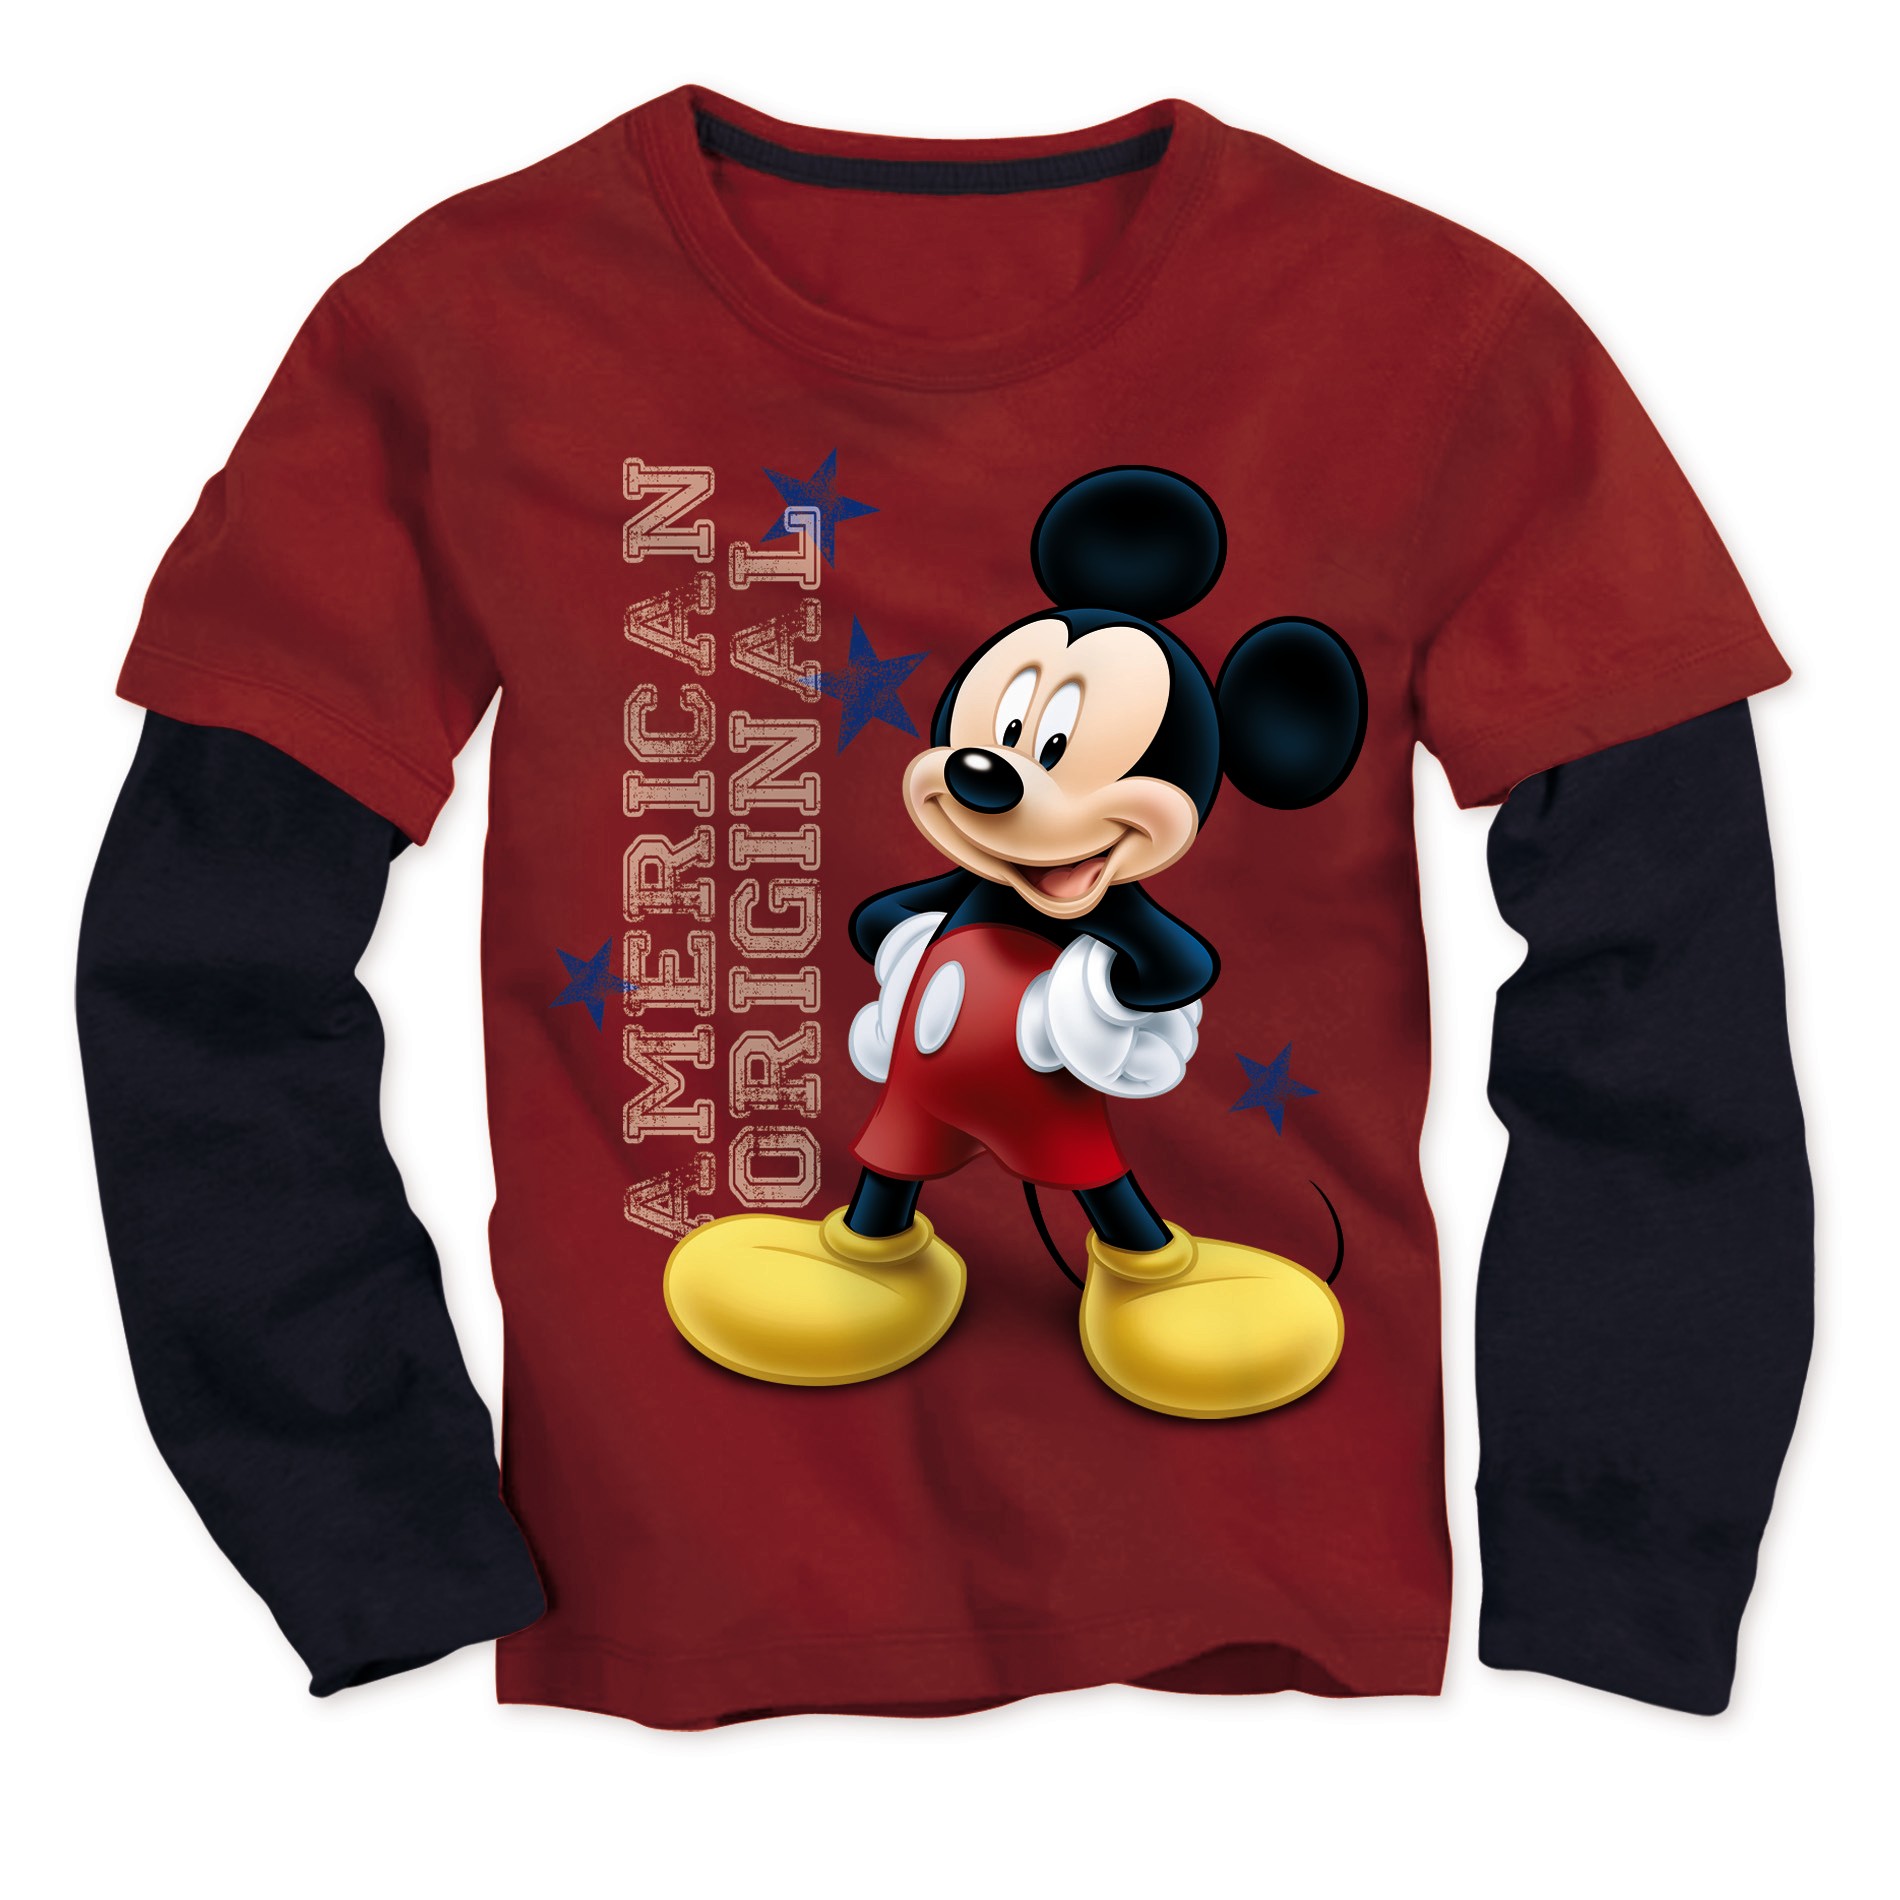 Disney Mickey Mouse Toddler Boy's Layered-Look Graphic T-Shirt